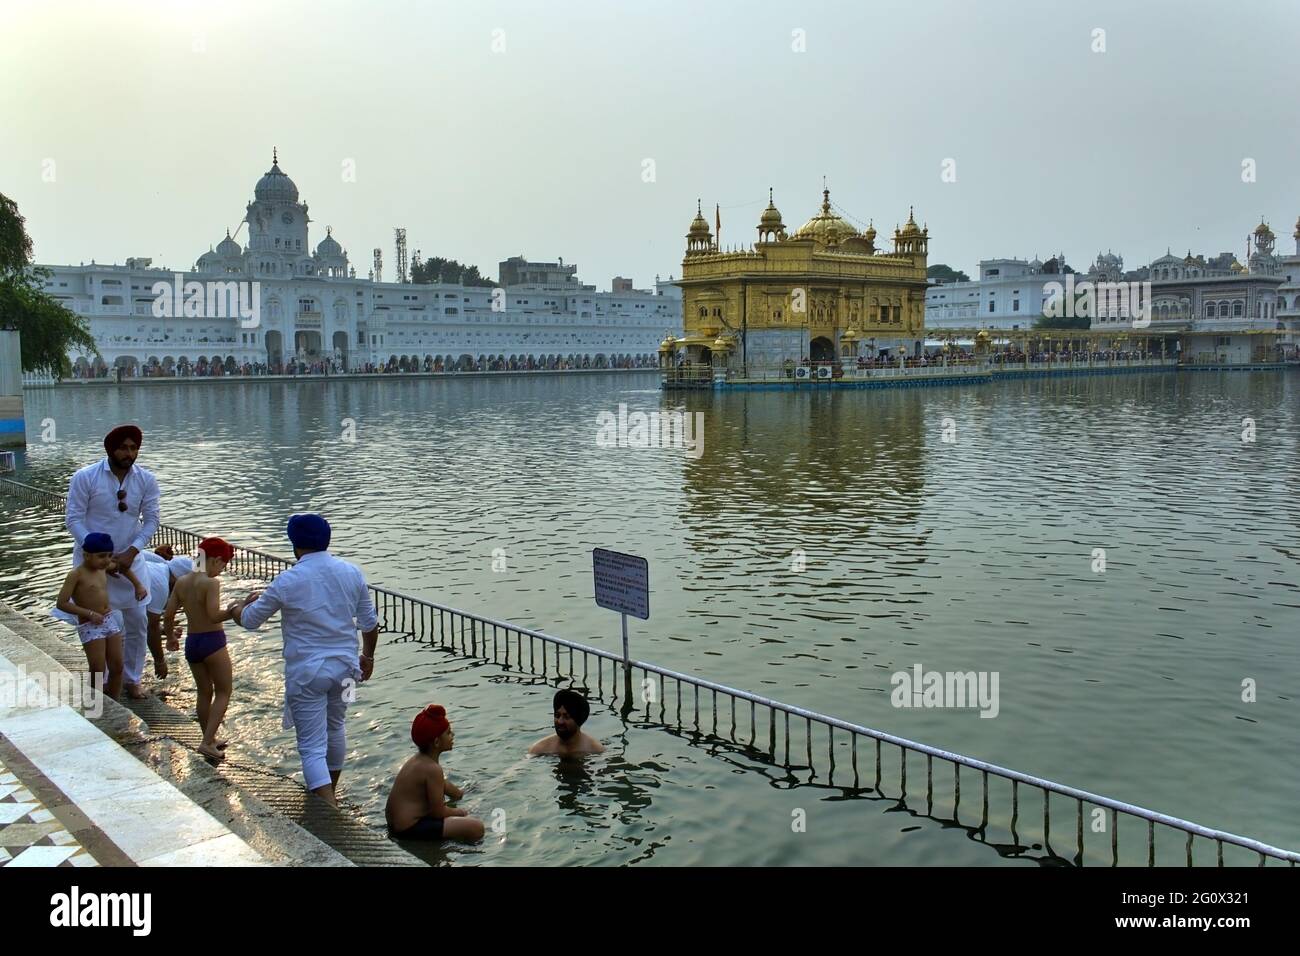 AMRITSAR, INDIA - November 06, 2016: Sikh devotees bathing or taking a dip in a pool in the Golden Temple Harmandir Sahib in state Punjab, India Stock Photo